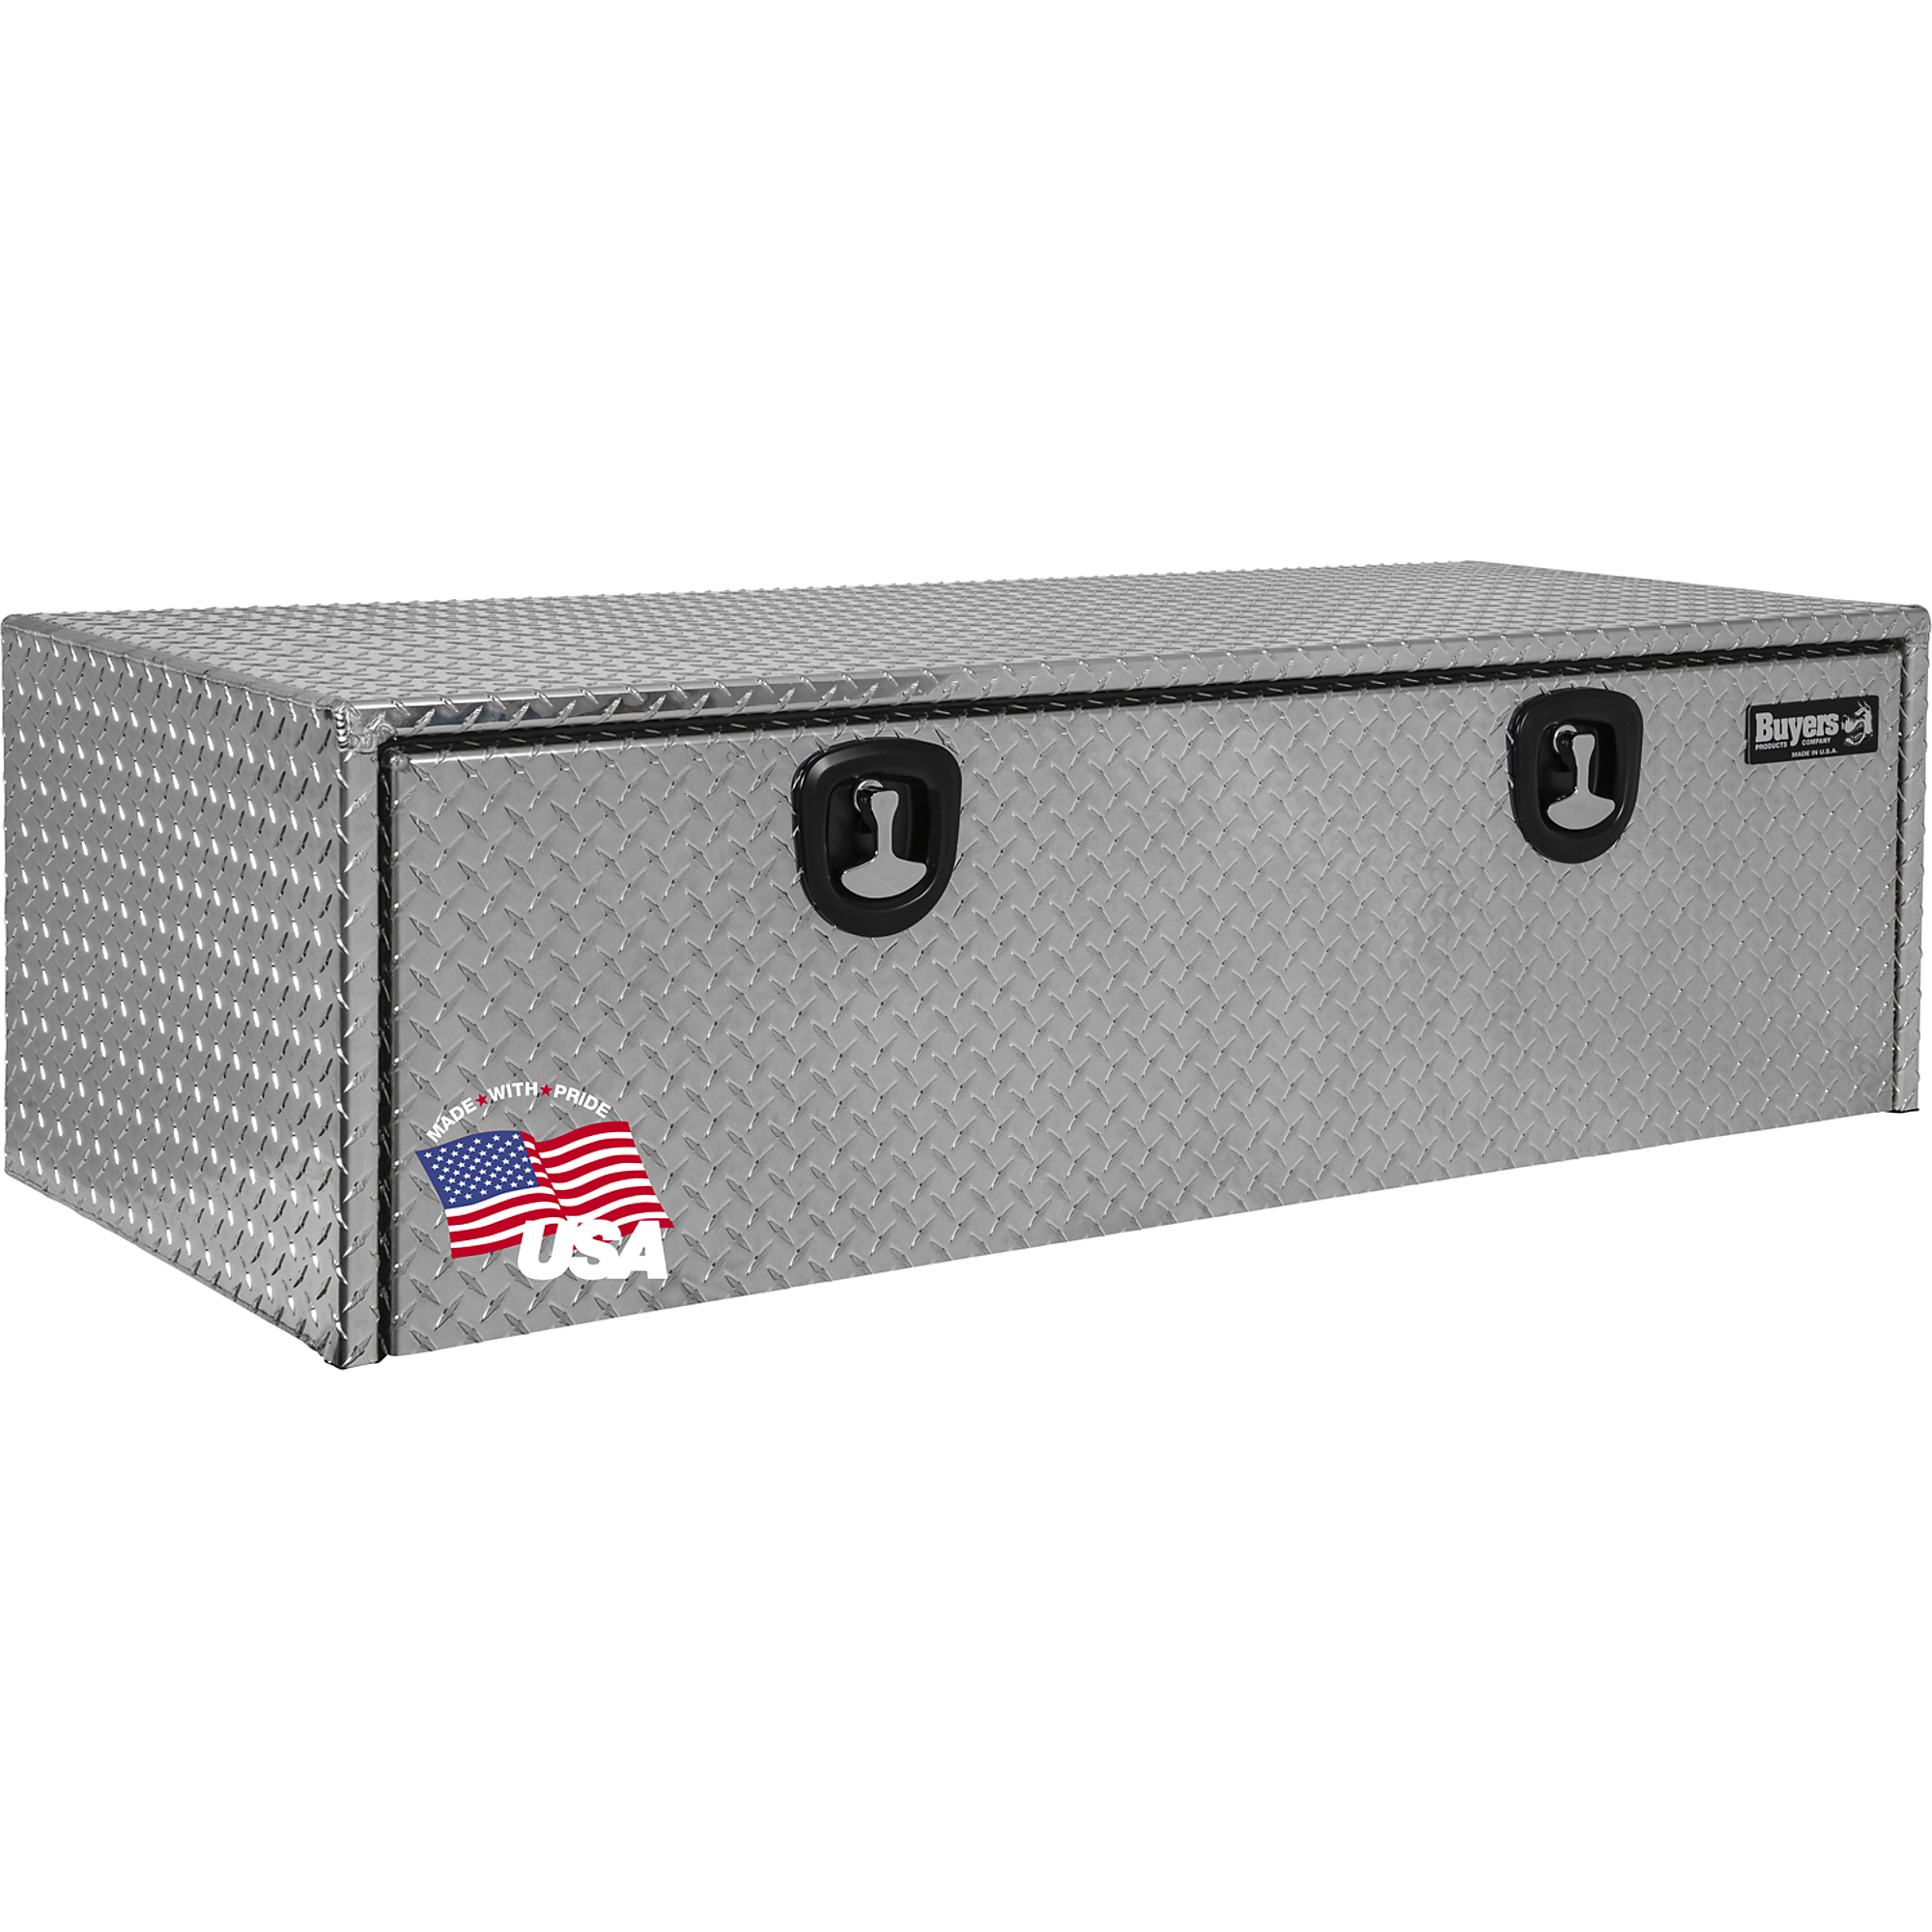 Buyers Products, 60Inch Diamond Tread Aluminum Underbody Truck Box, Width 60 in, Material Aluminum, Color Finish Diamond Plate Silver, Model 1705125